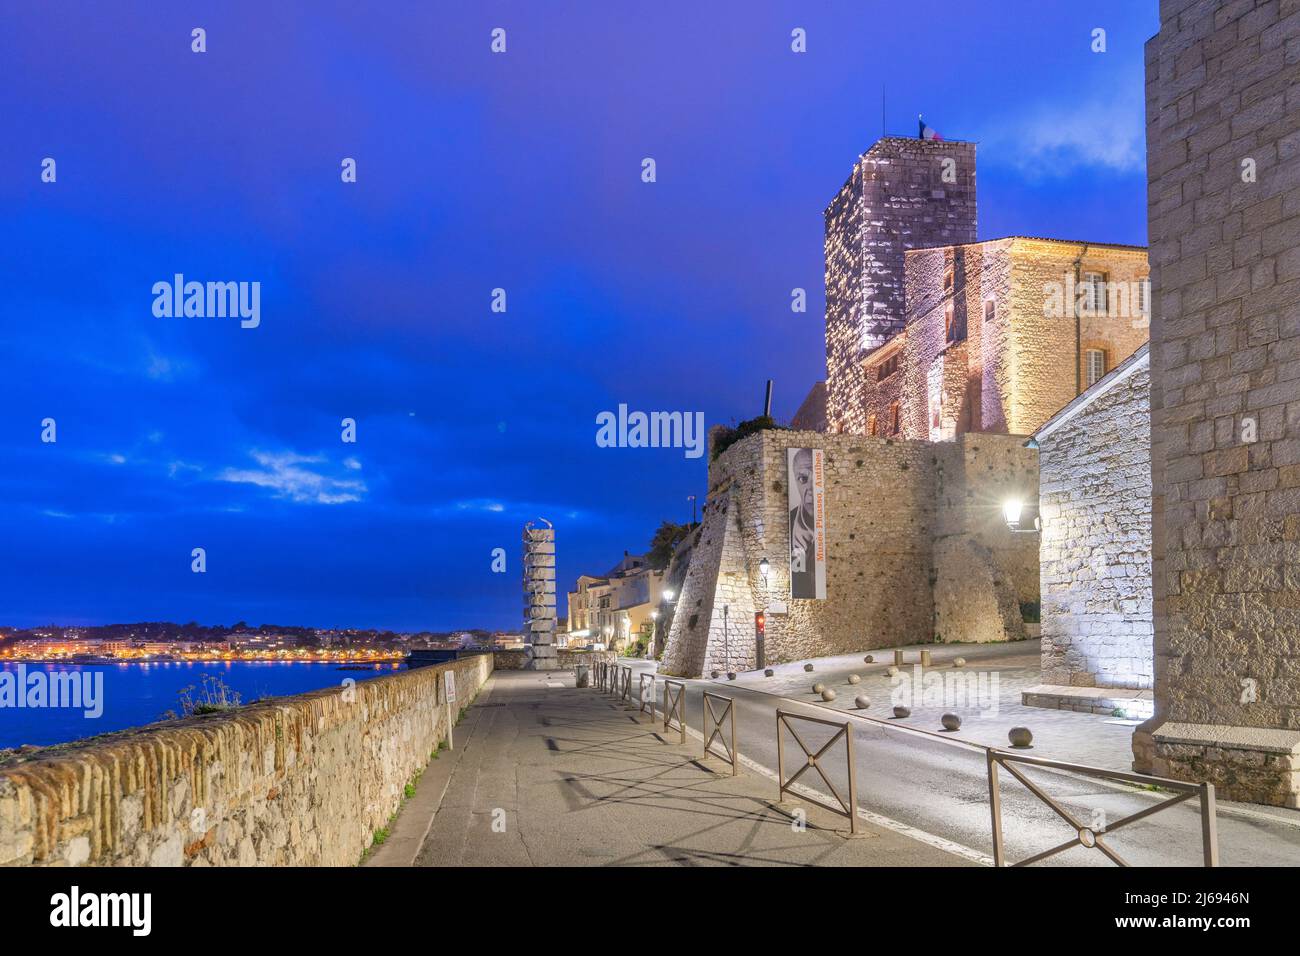 Picasso-Museum, Antibes, Alpes-Maritimes, Provence-Alpes-Cote d'Azur, Frankreich, Mittelmeer, Europa Stockfoto